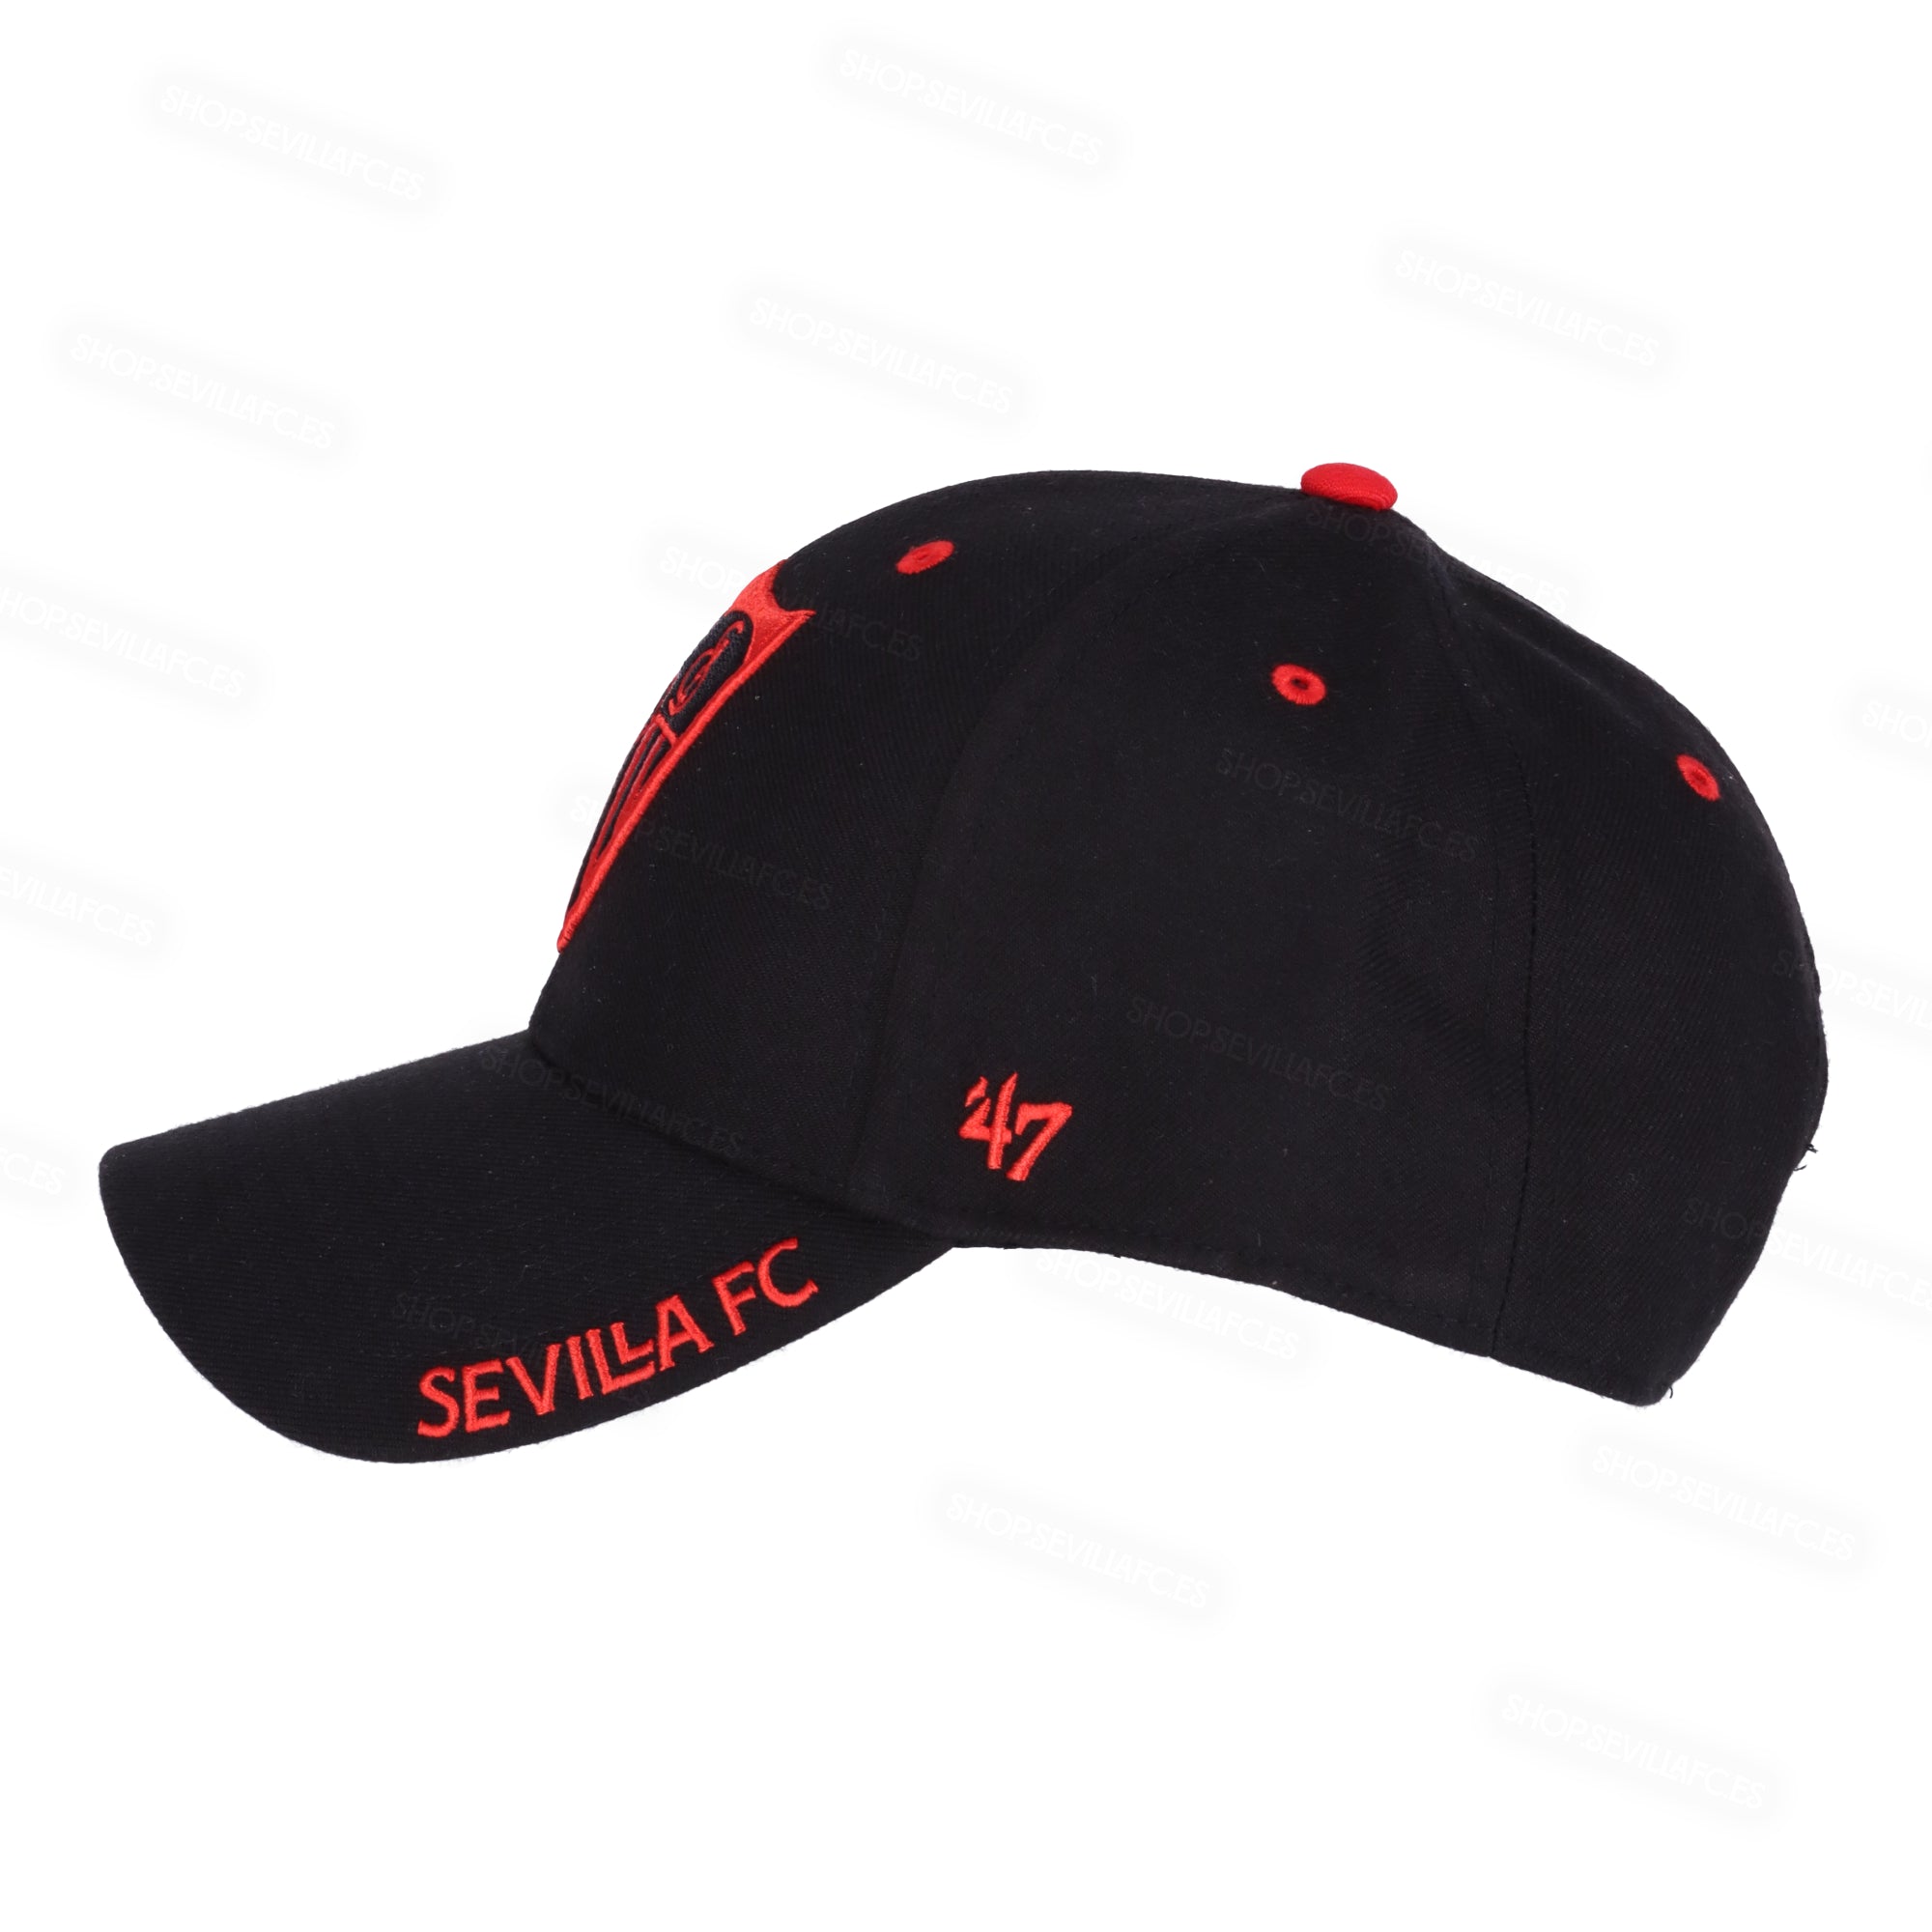 Black cap with embroidered red crest